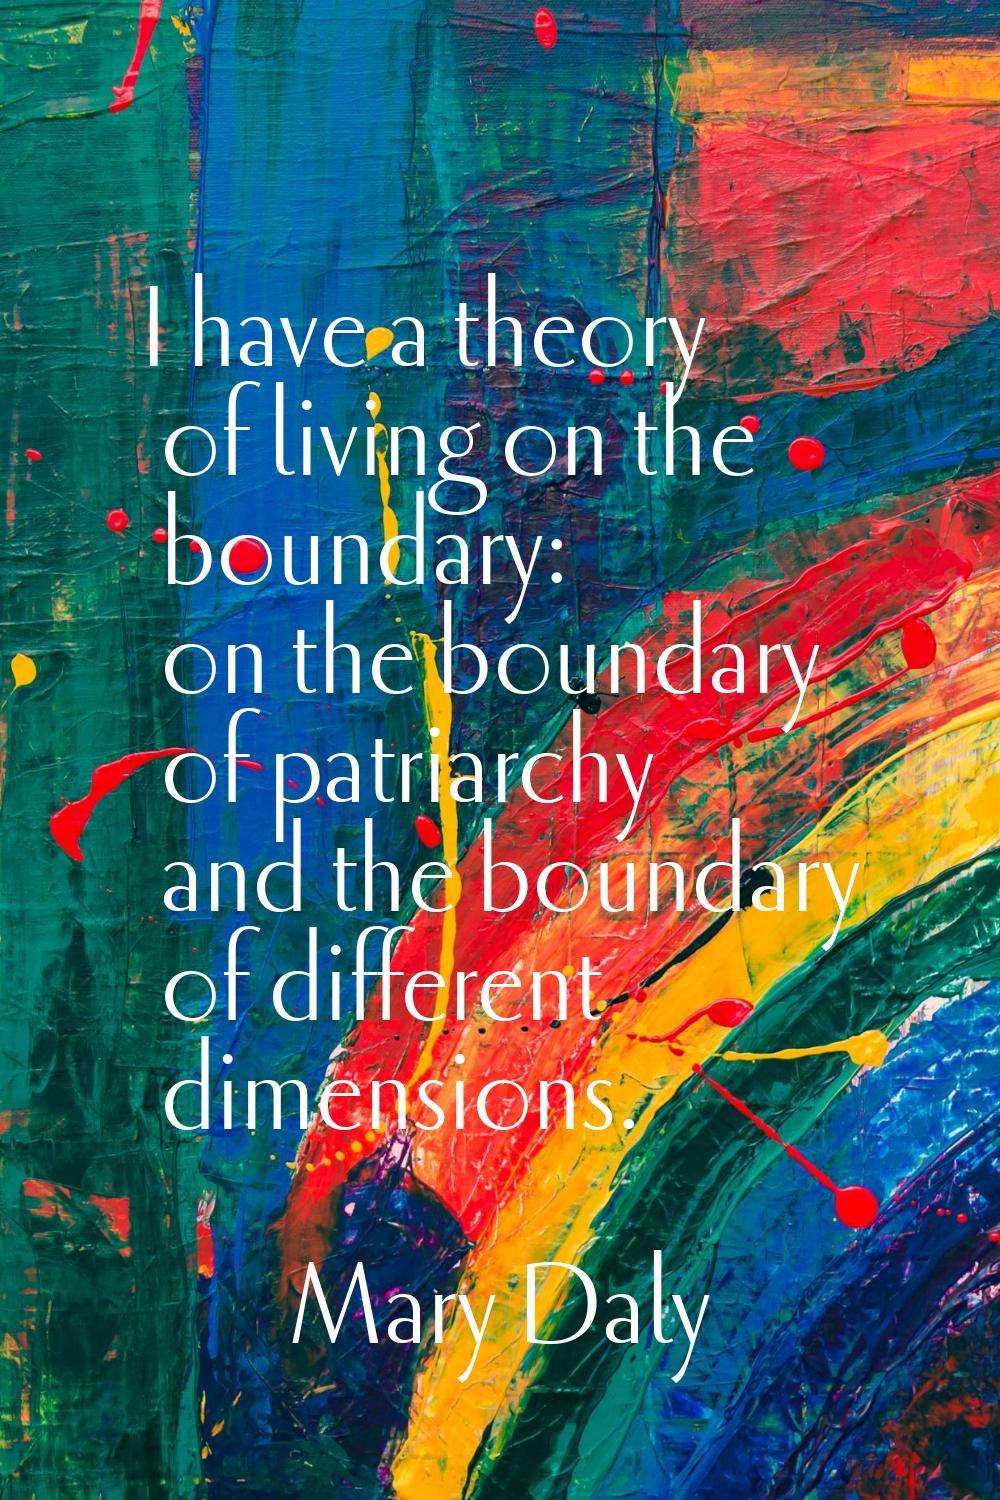 I have a theory of living on the boundary: on the boundary of patriarchy and the boundary of differ